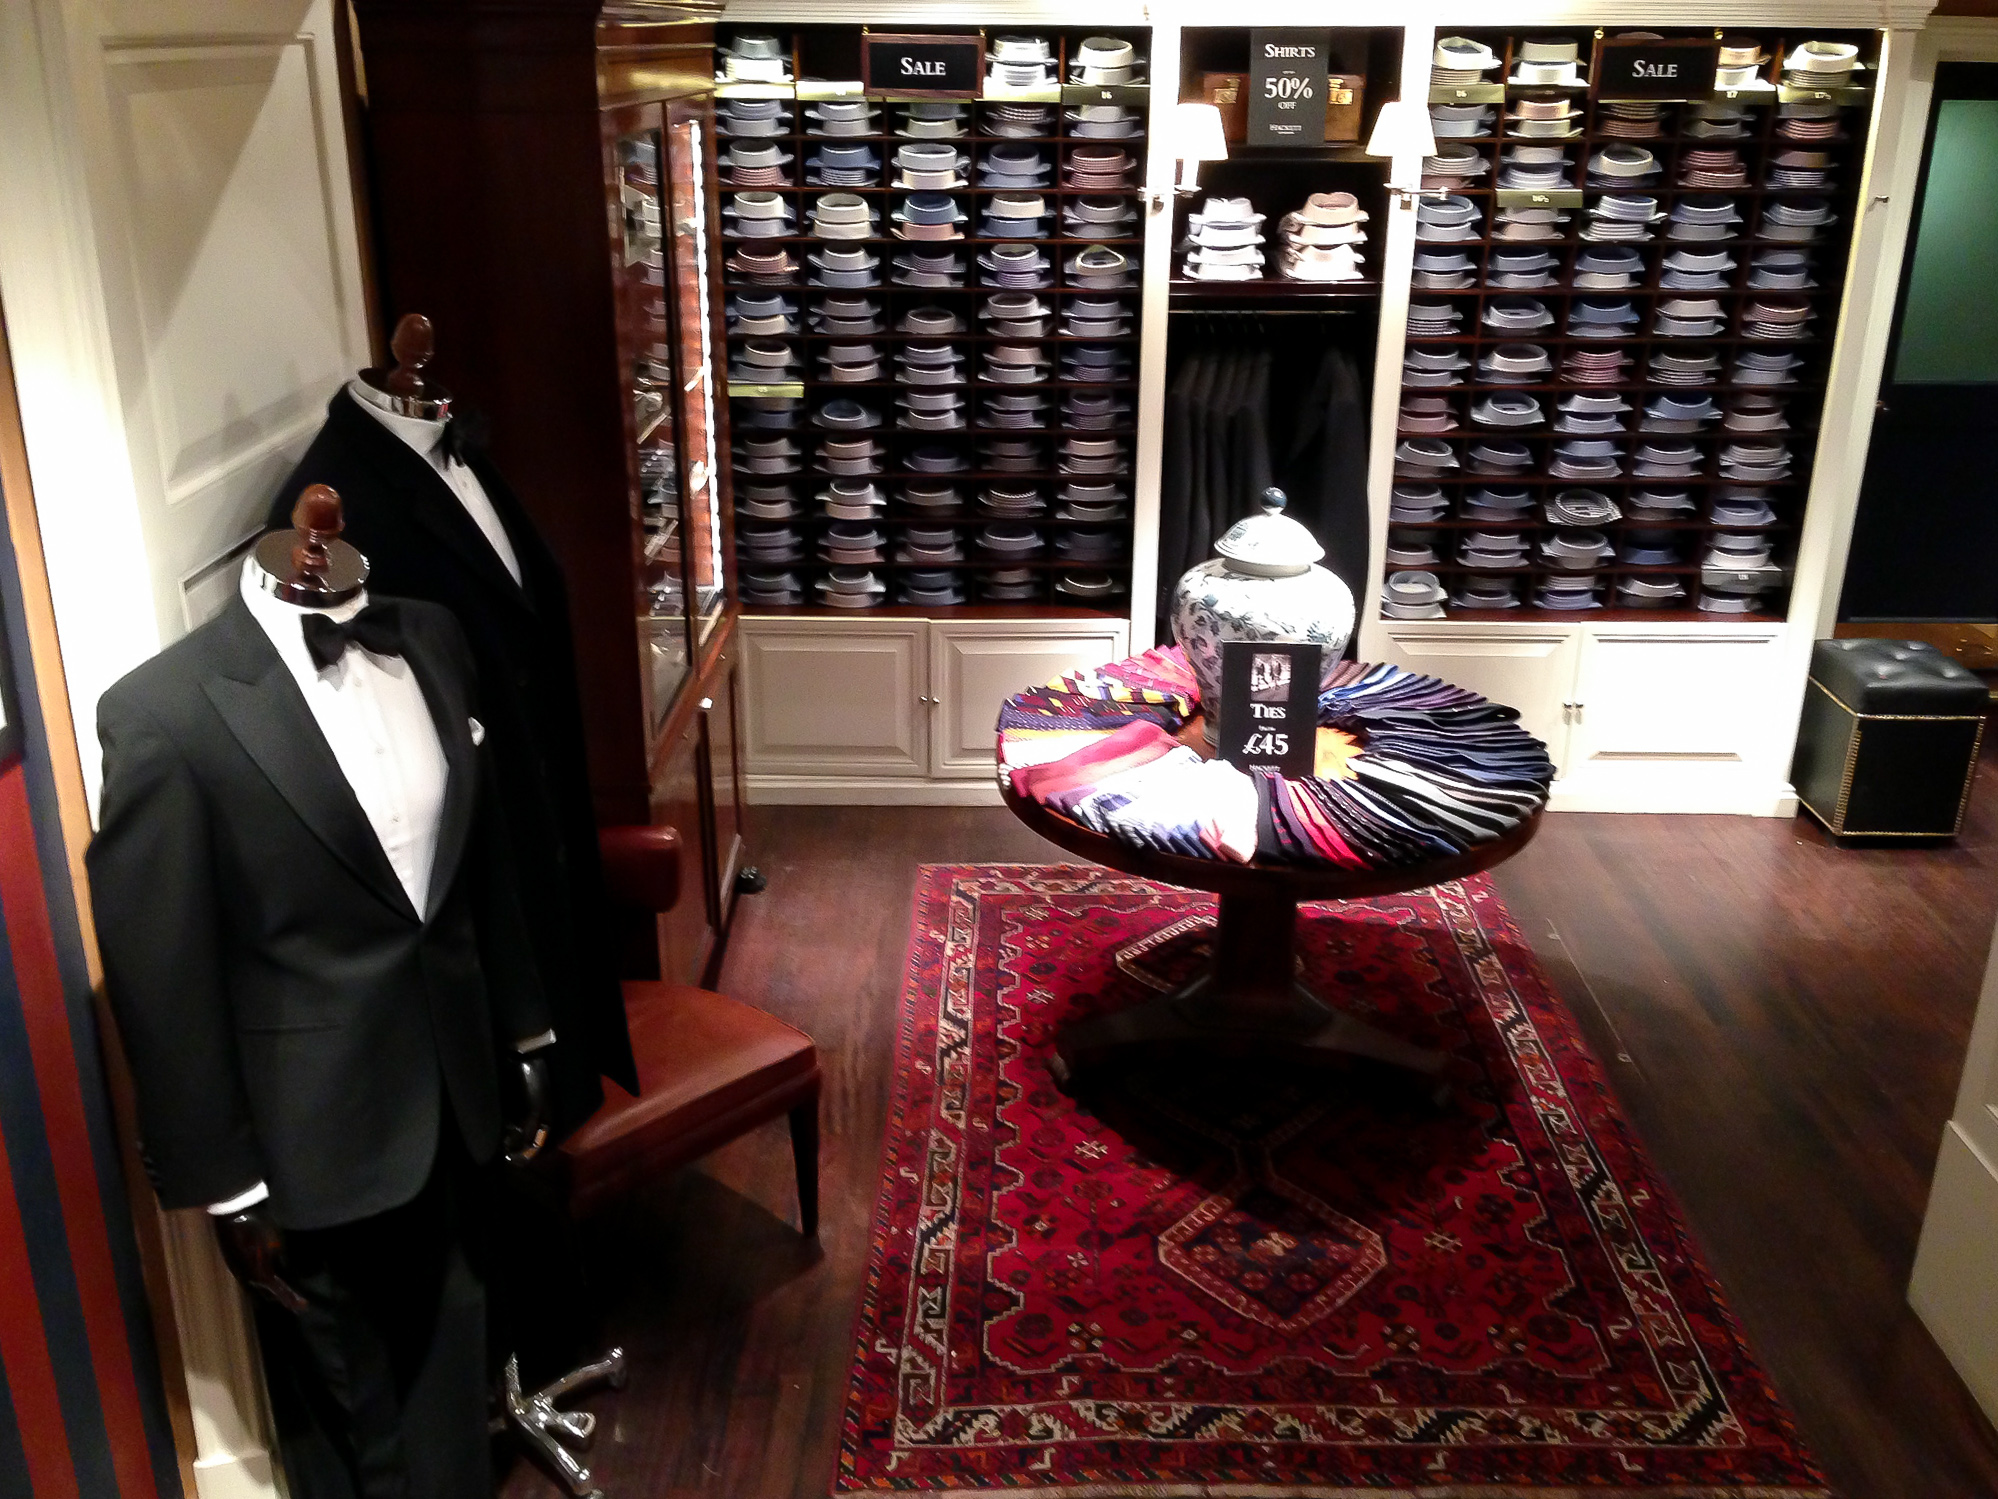 Formal menswear at Hackett in London. Photo by alphacityguides.